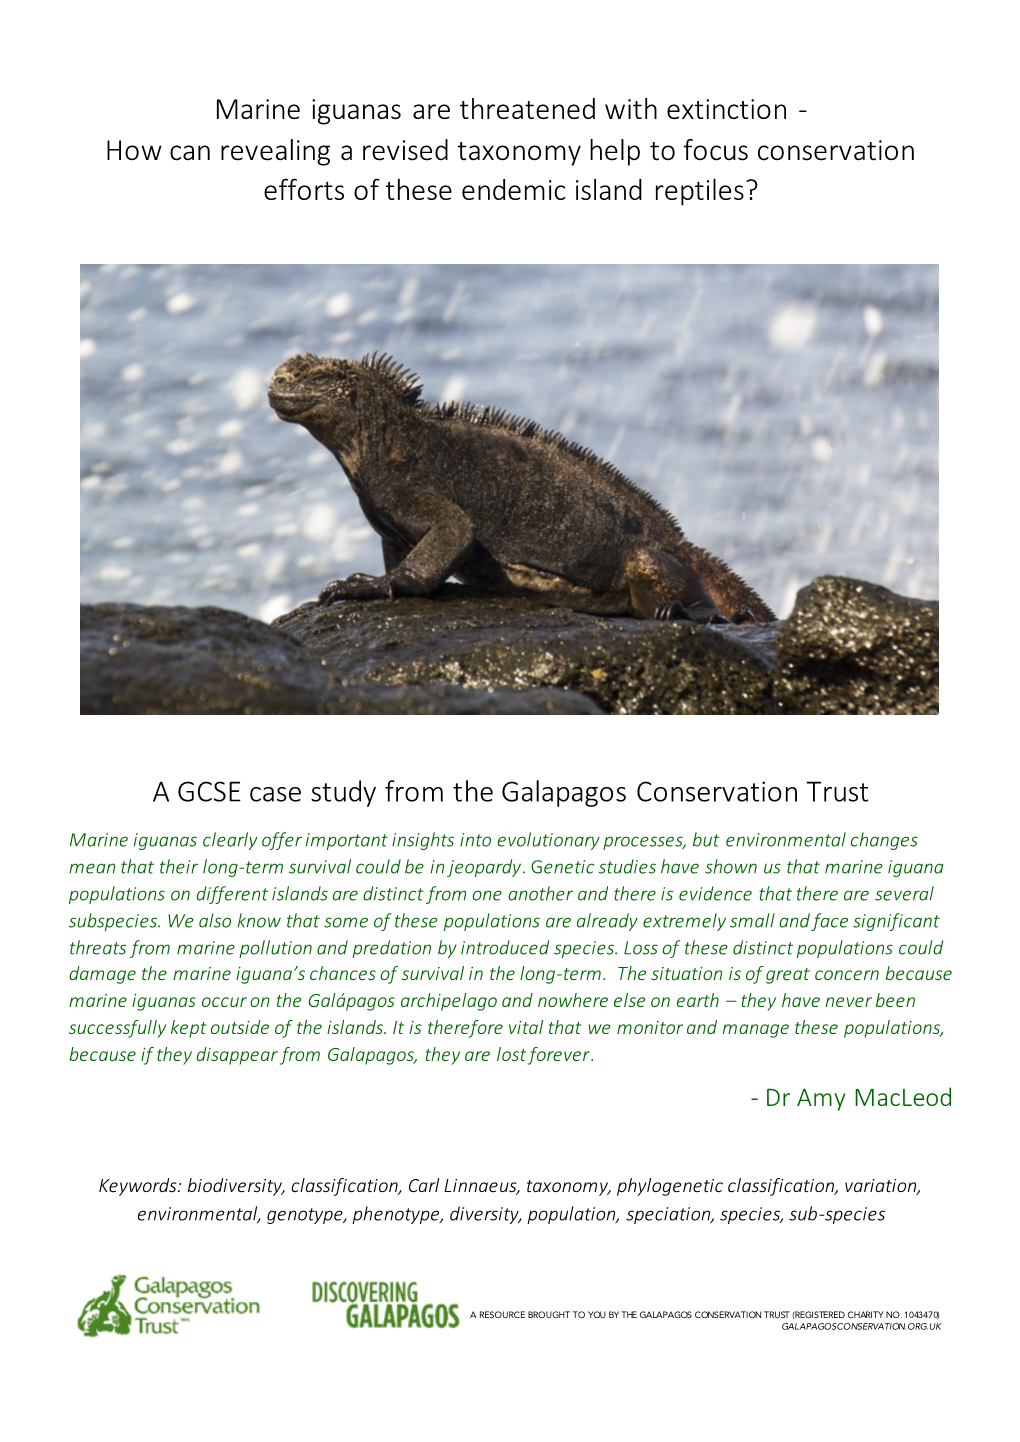 Marine Iguanas Are Threatened with Extinction - How Can Revealing a Revised Taxonomy Help to Focus Conservation Efforts of These Endemic Island Reptiles?